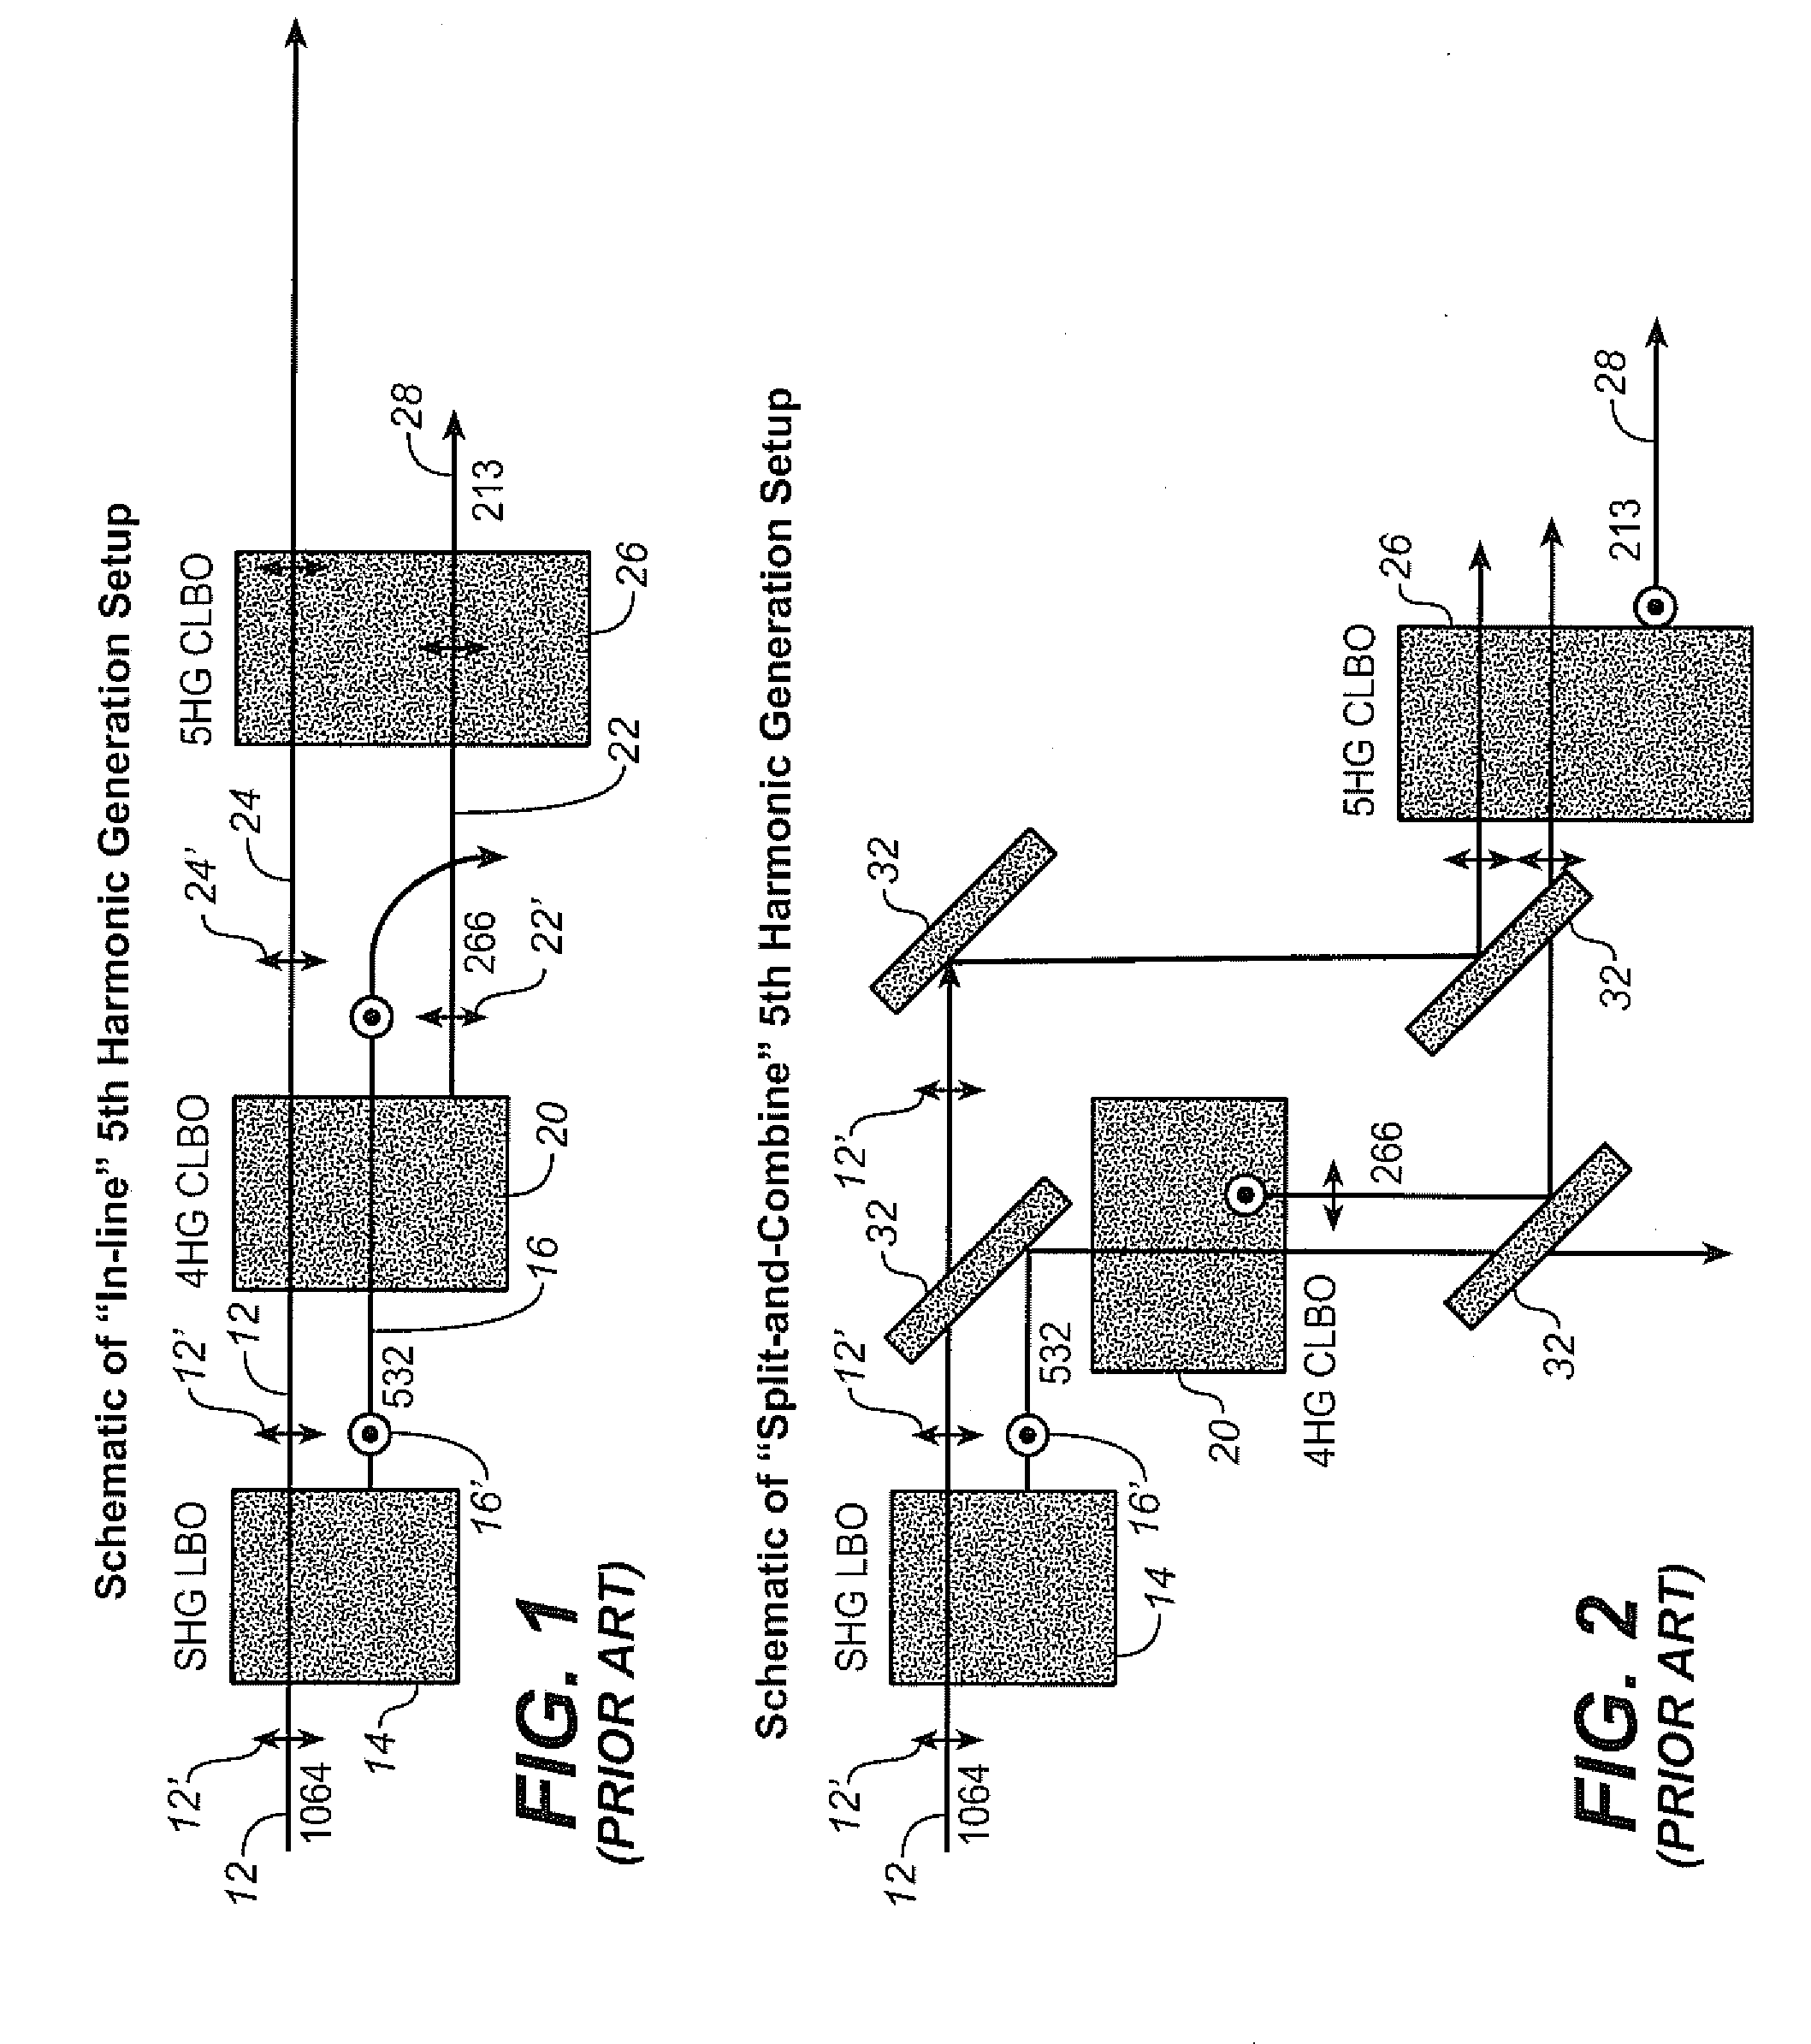 Efficient pulse laser light generation and devices using the same